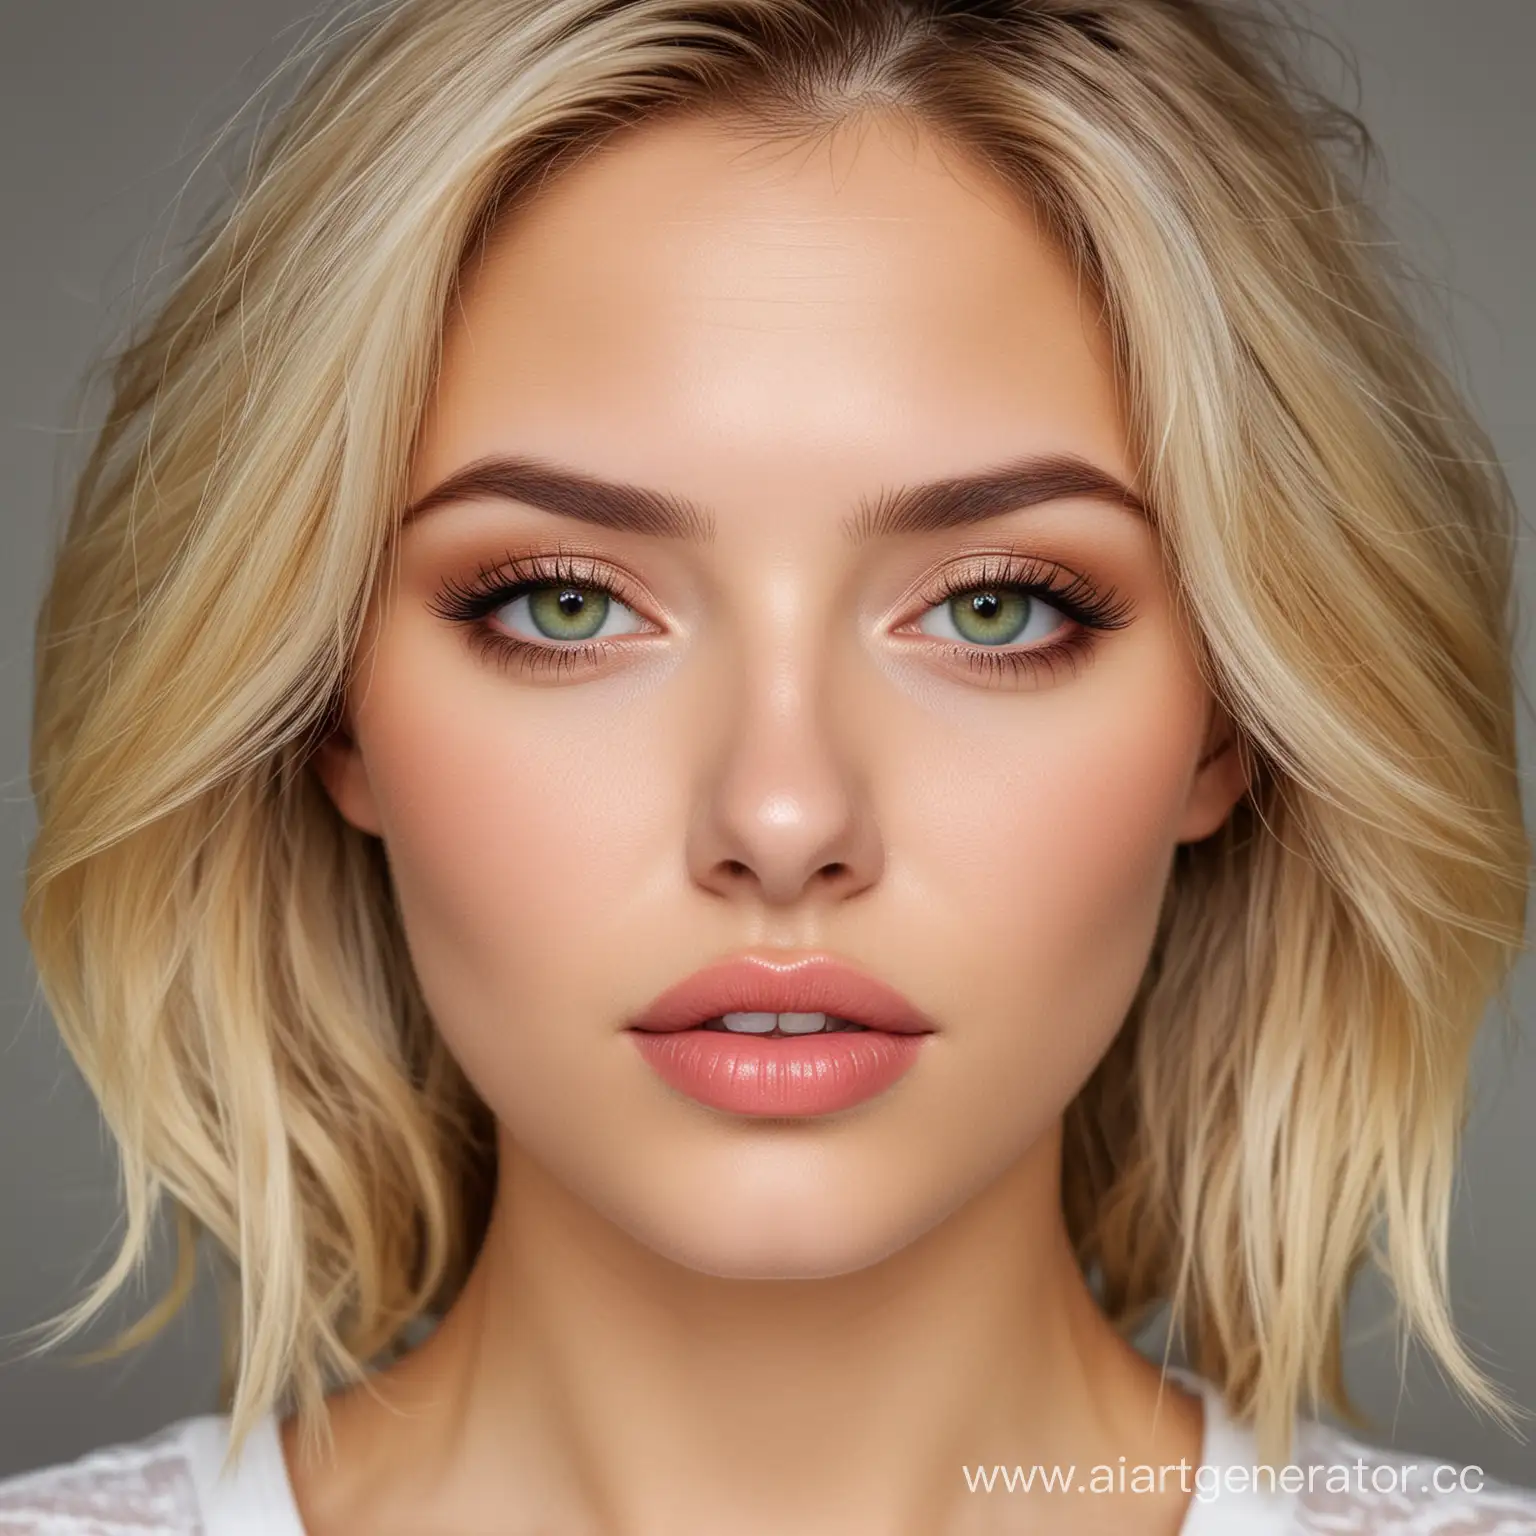 Charming-Blonde-with-Expressive-Green-Eyes-and-Delicate-Facial-Features